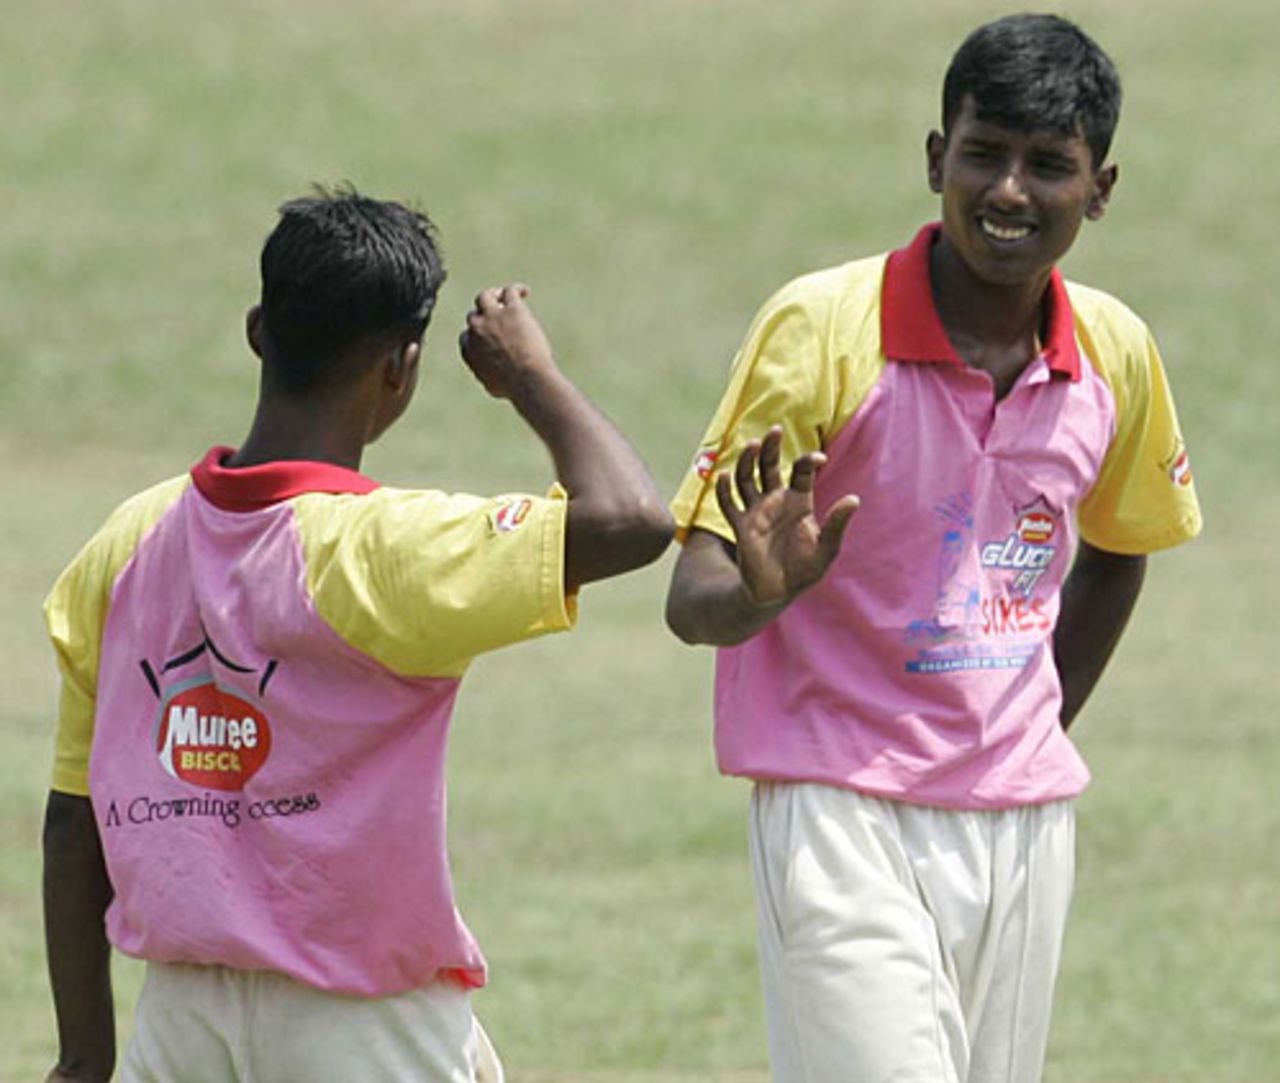 Rajeswar Nirujan gets the high fives after picking up a wicket, Jaffna Combine Schools v Richmond College, Glucofit Cricket Sixes, Colombo, October 18, 2009